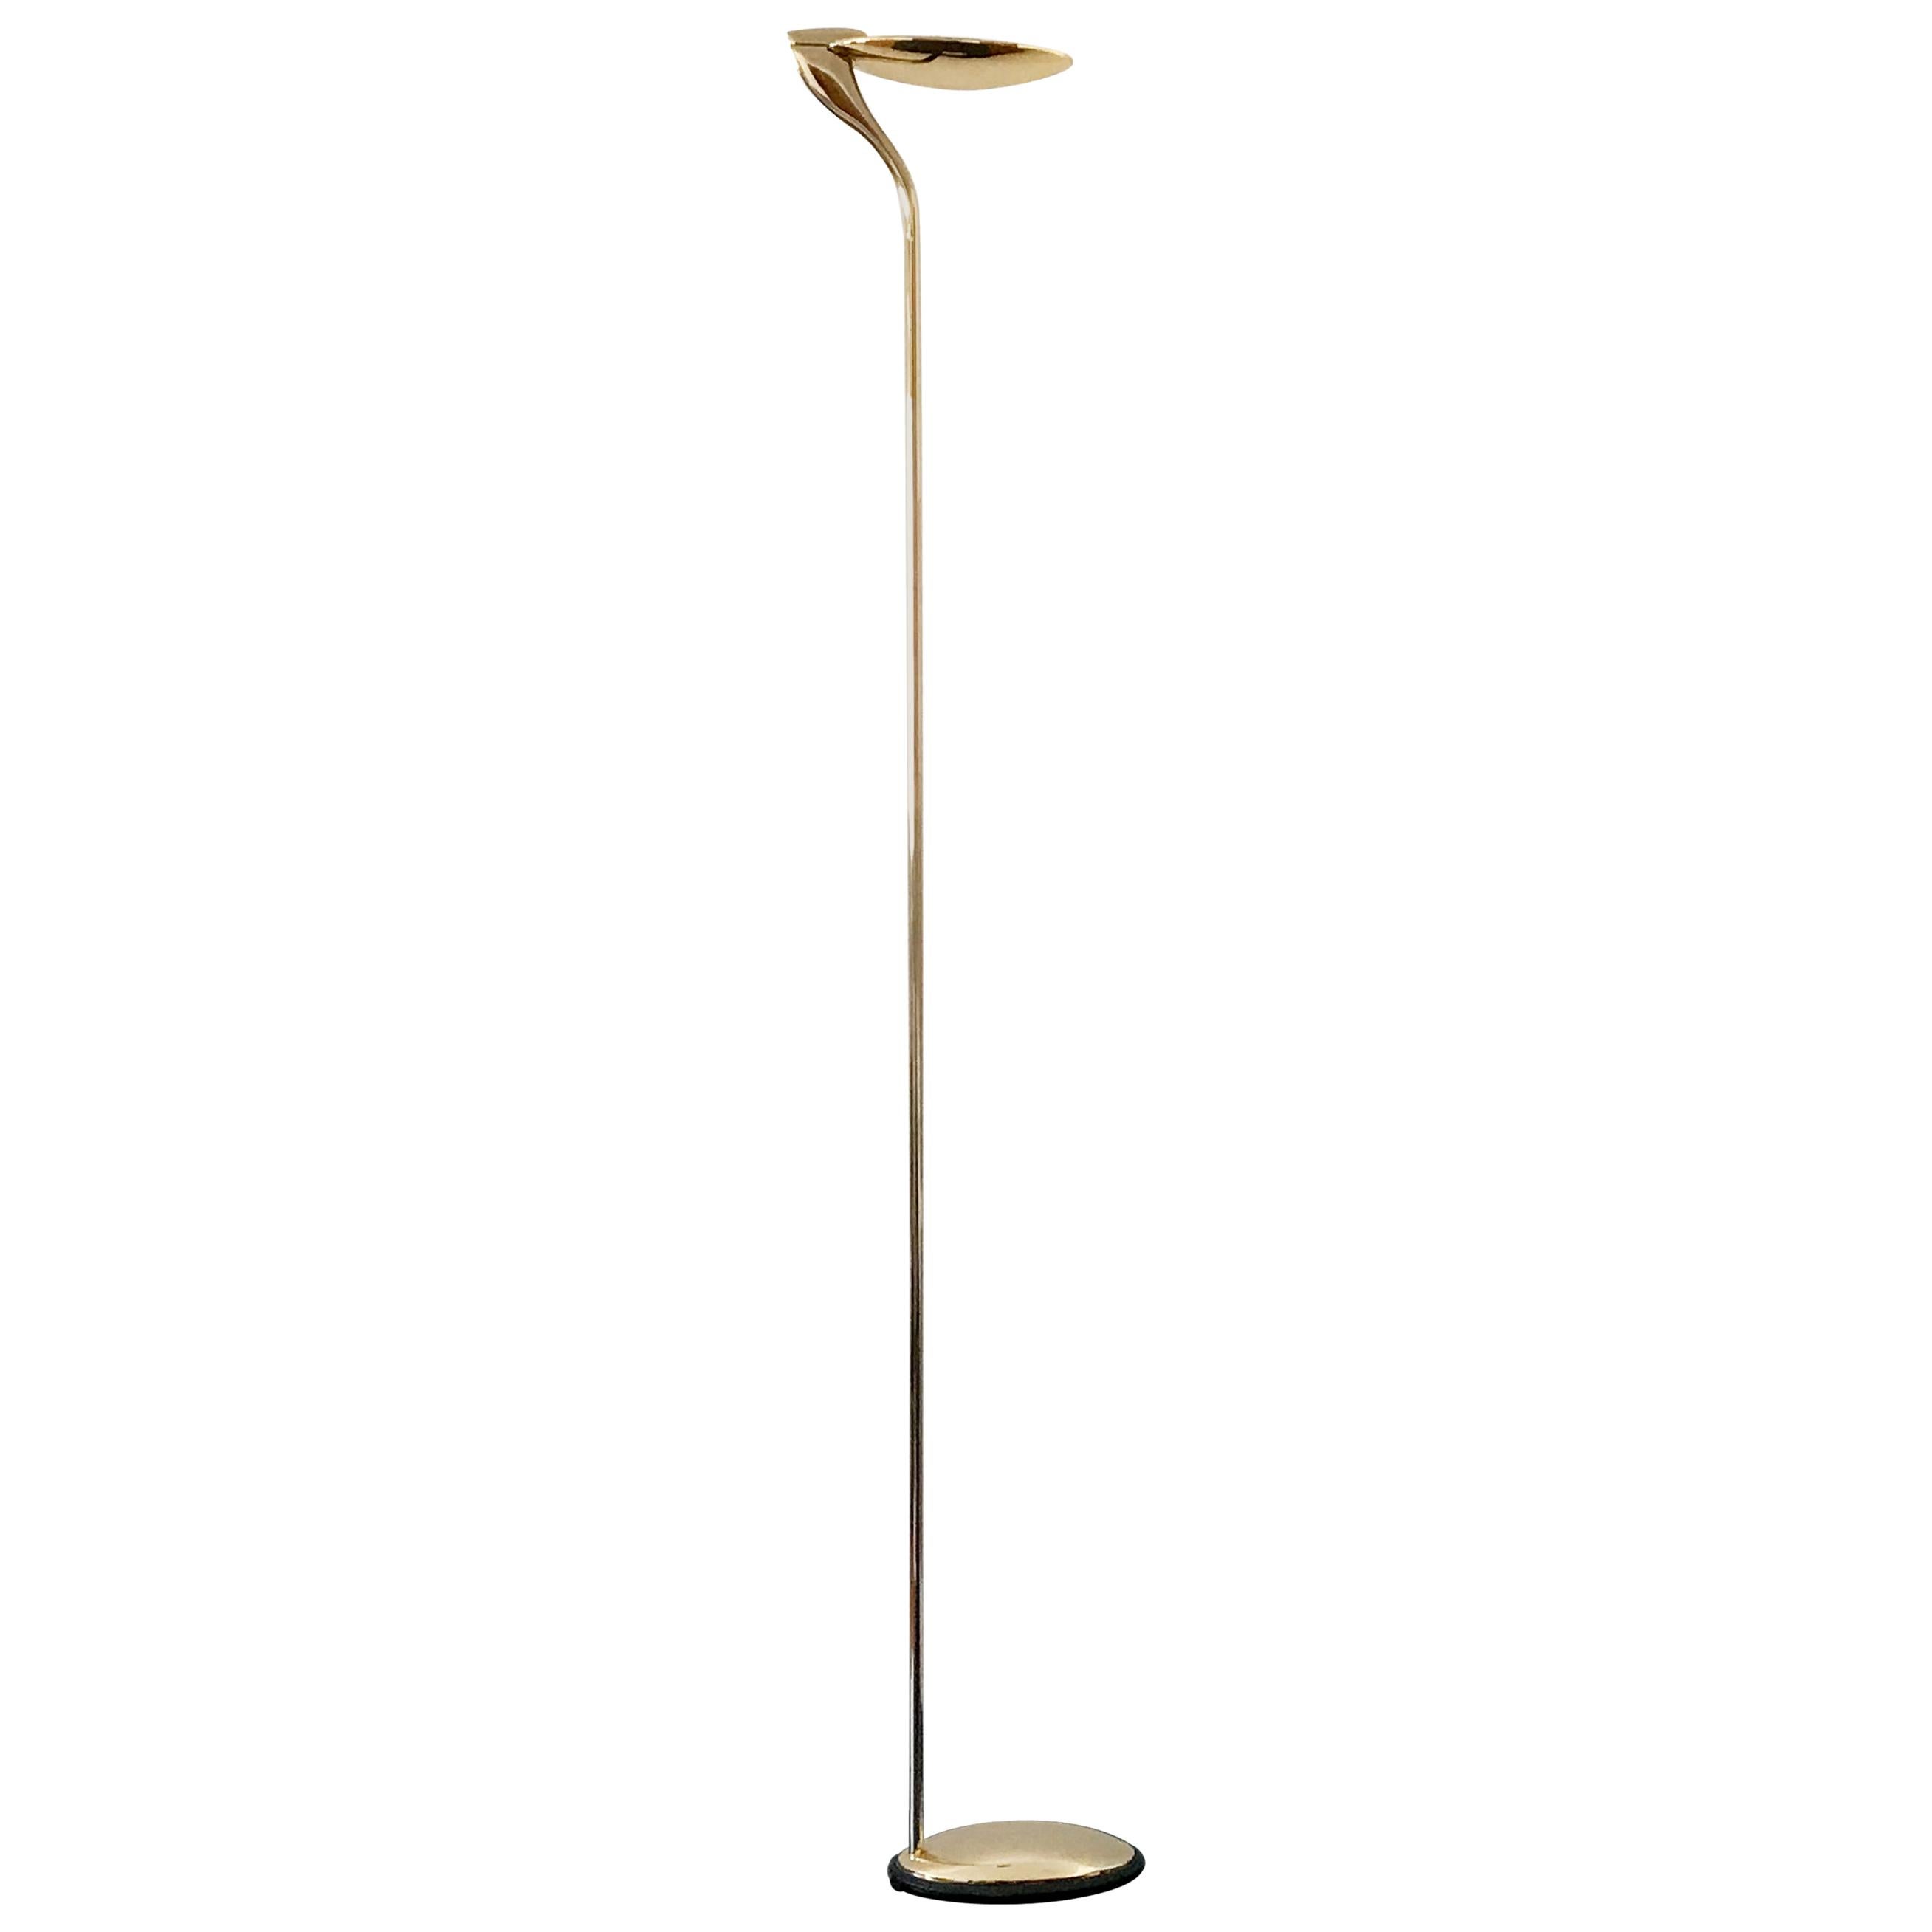 Exceptional Minimalist Brass Floor Lamp Uplighter by Florian Schulz, Germany For Sale